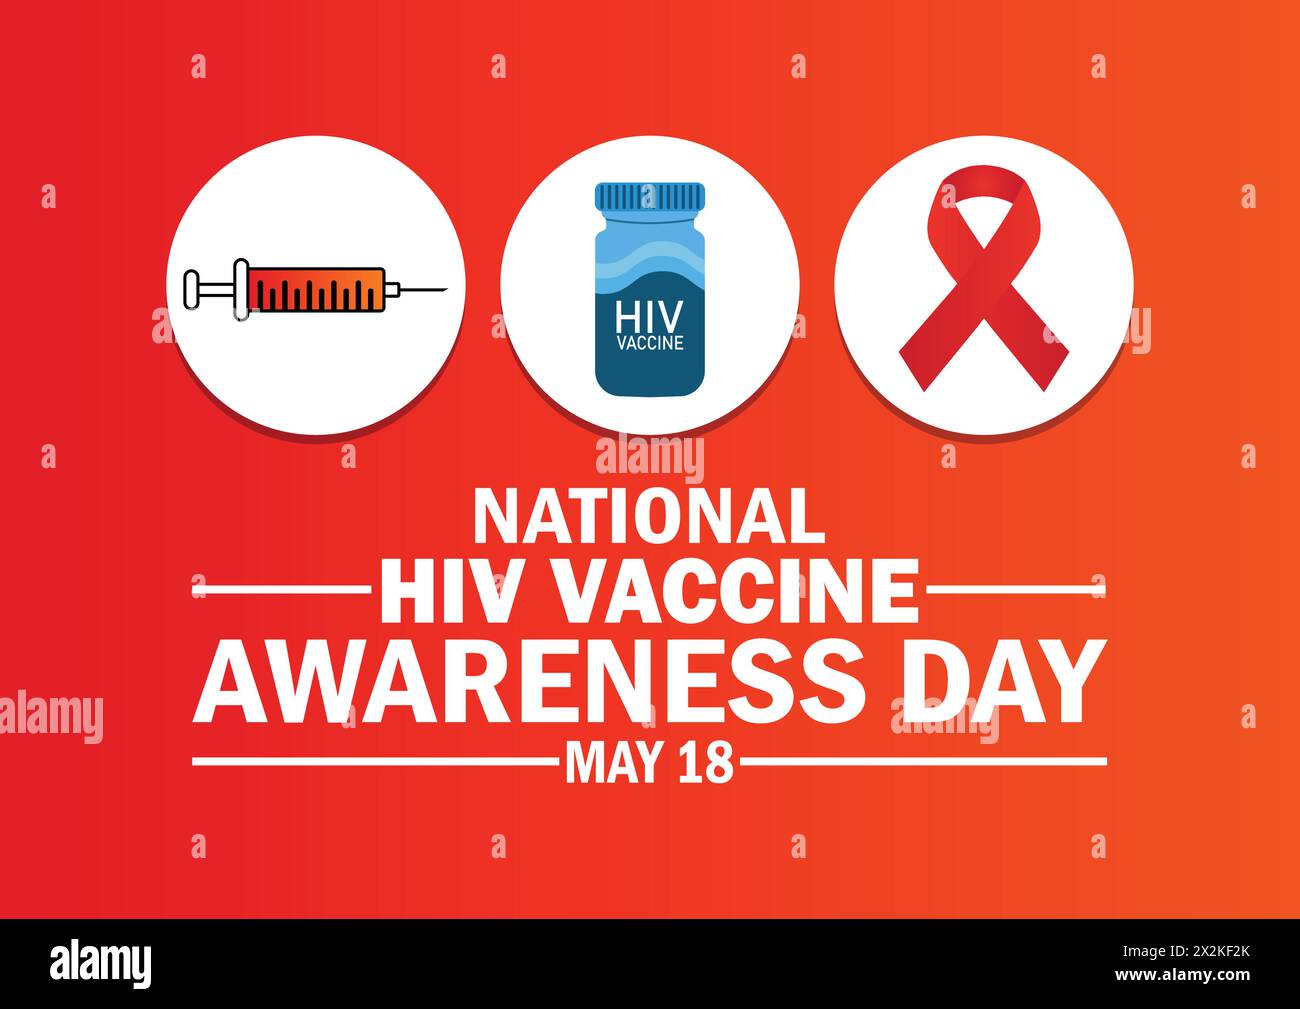 National HIV Vaccine Awareness Day wallpaper with shapes and typography, banner, card, poster, template. May 18. National HIV Vaccine Awareness Day Stock Vector